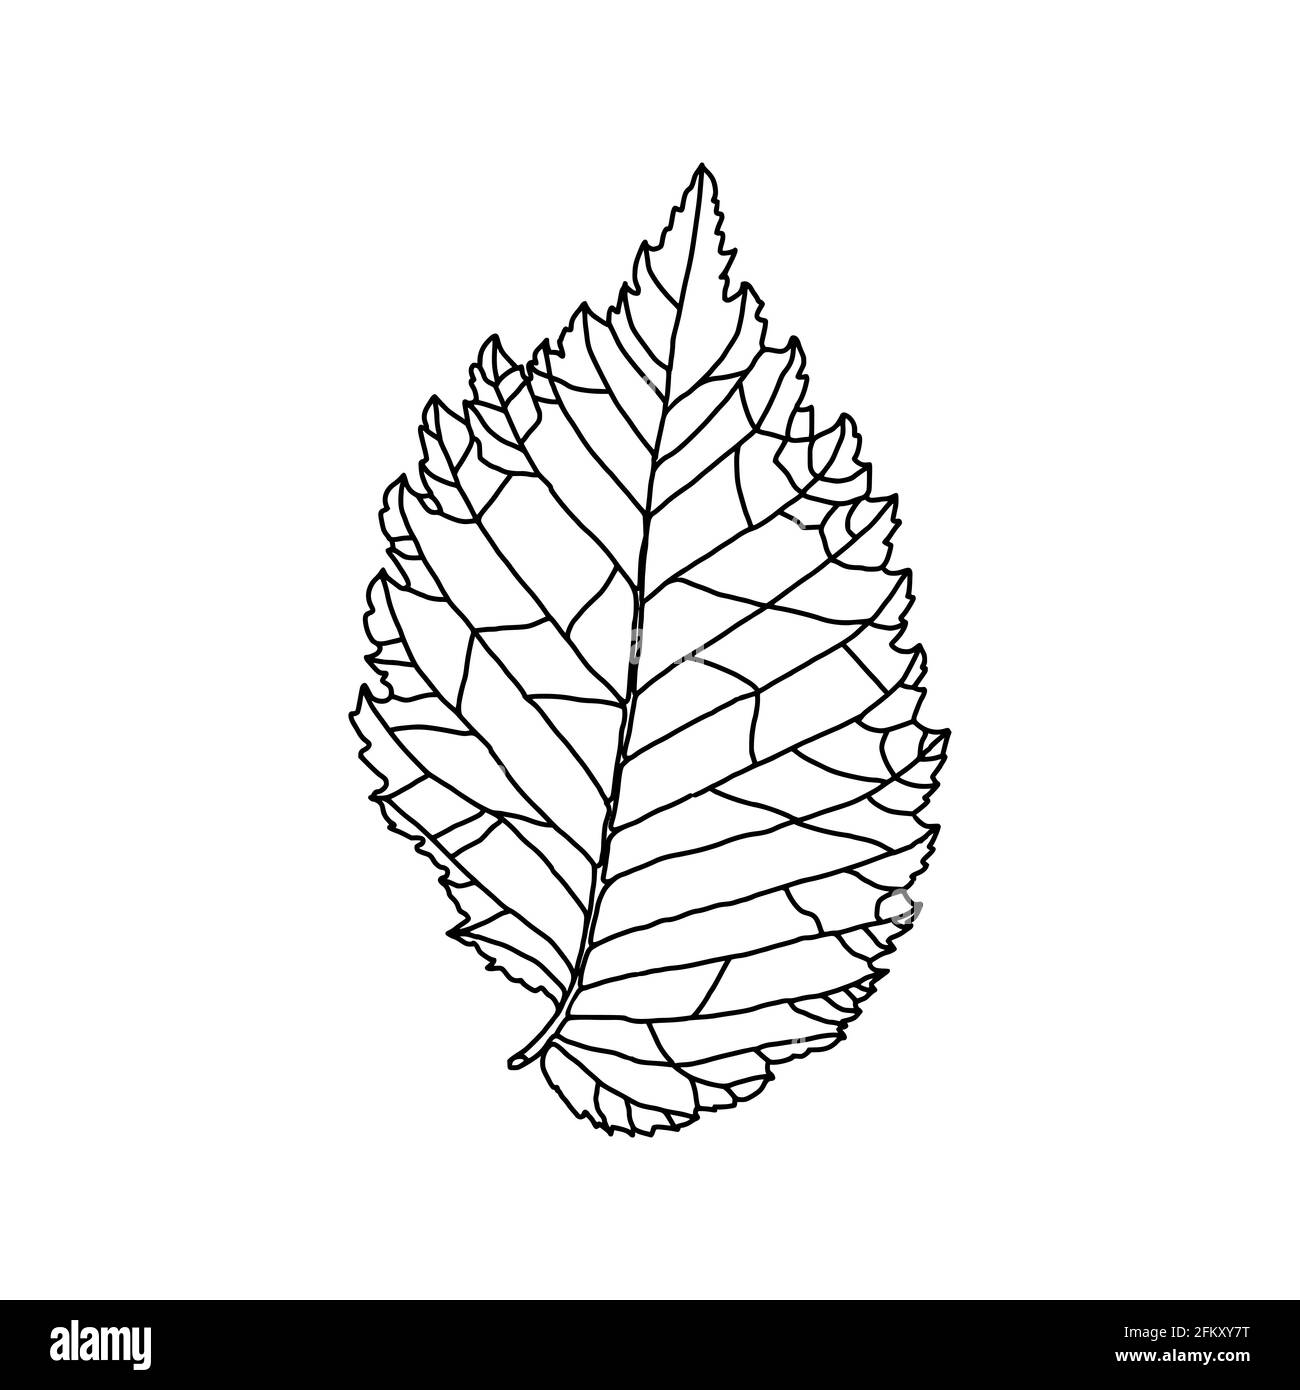 Stylized drawing of leaf of an elm tree with decorative veins isolated on a white background. Vector illustration. Design element for coloring book, c Stock Vector